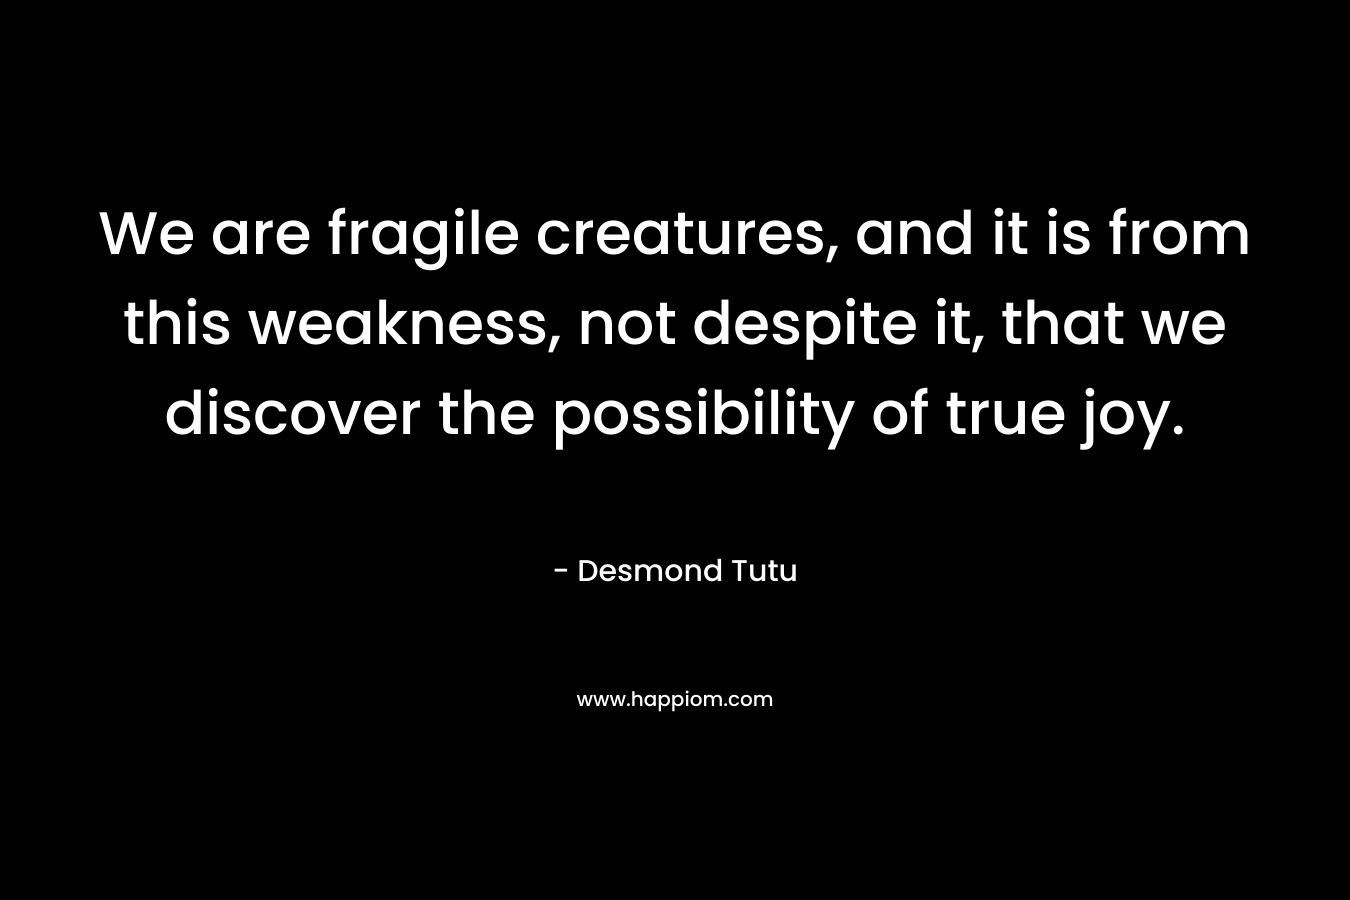 We are fragile creatures, and it is from this weakness, not despite it, that we discover the possibility of true joy.